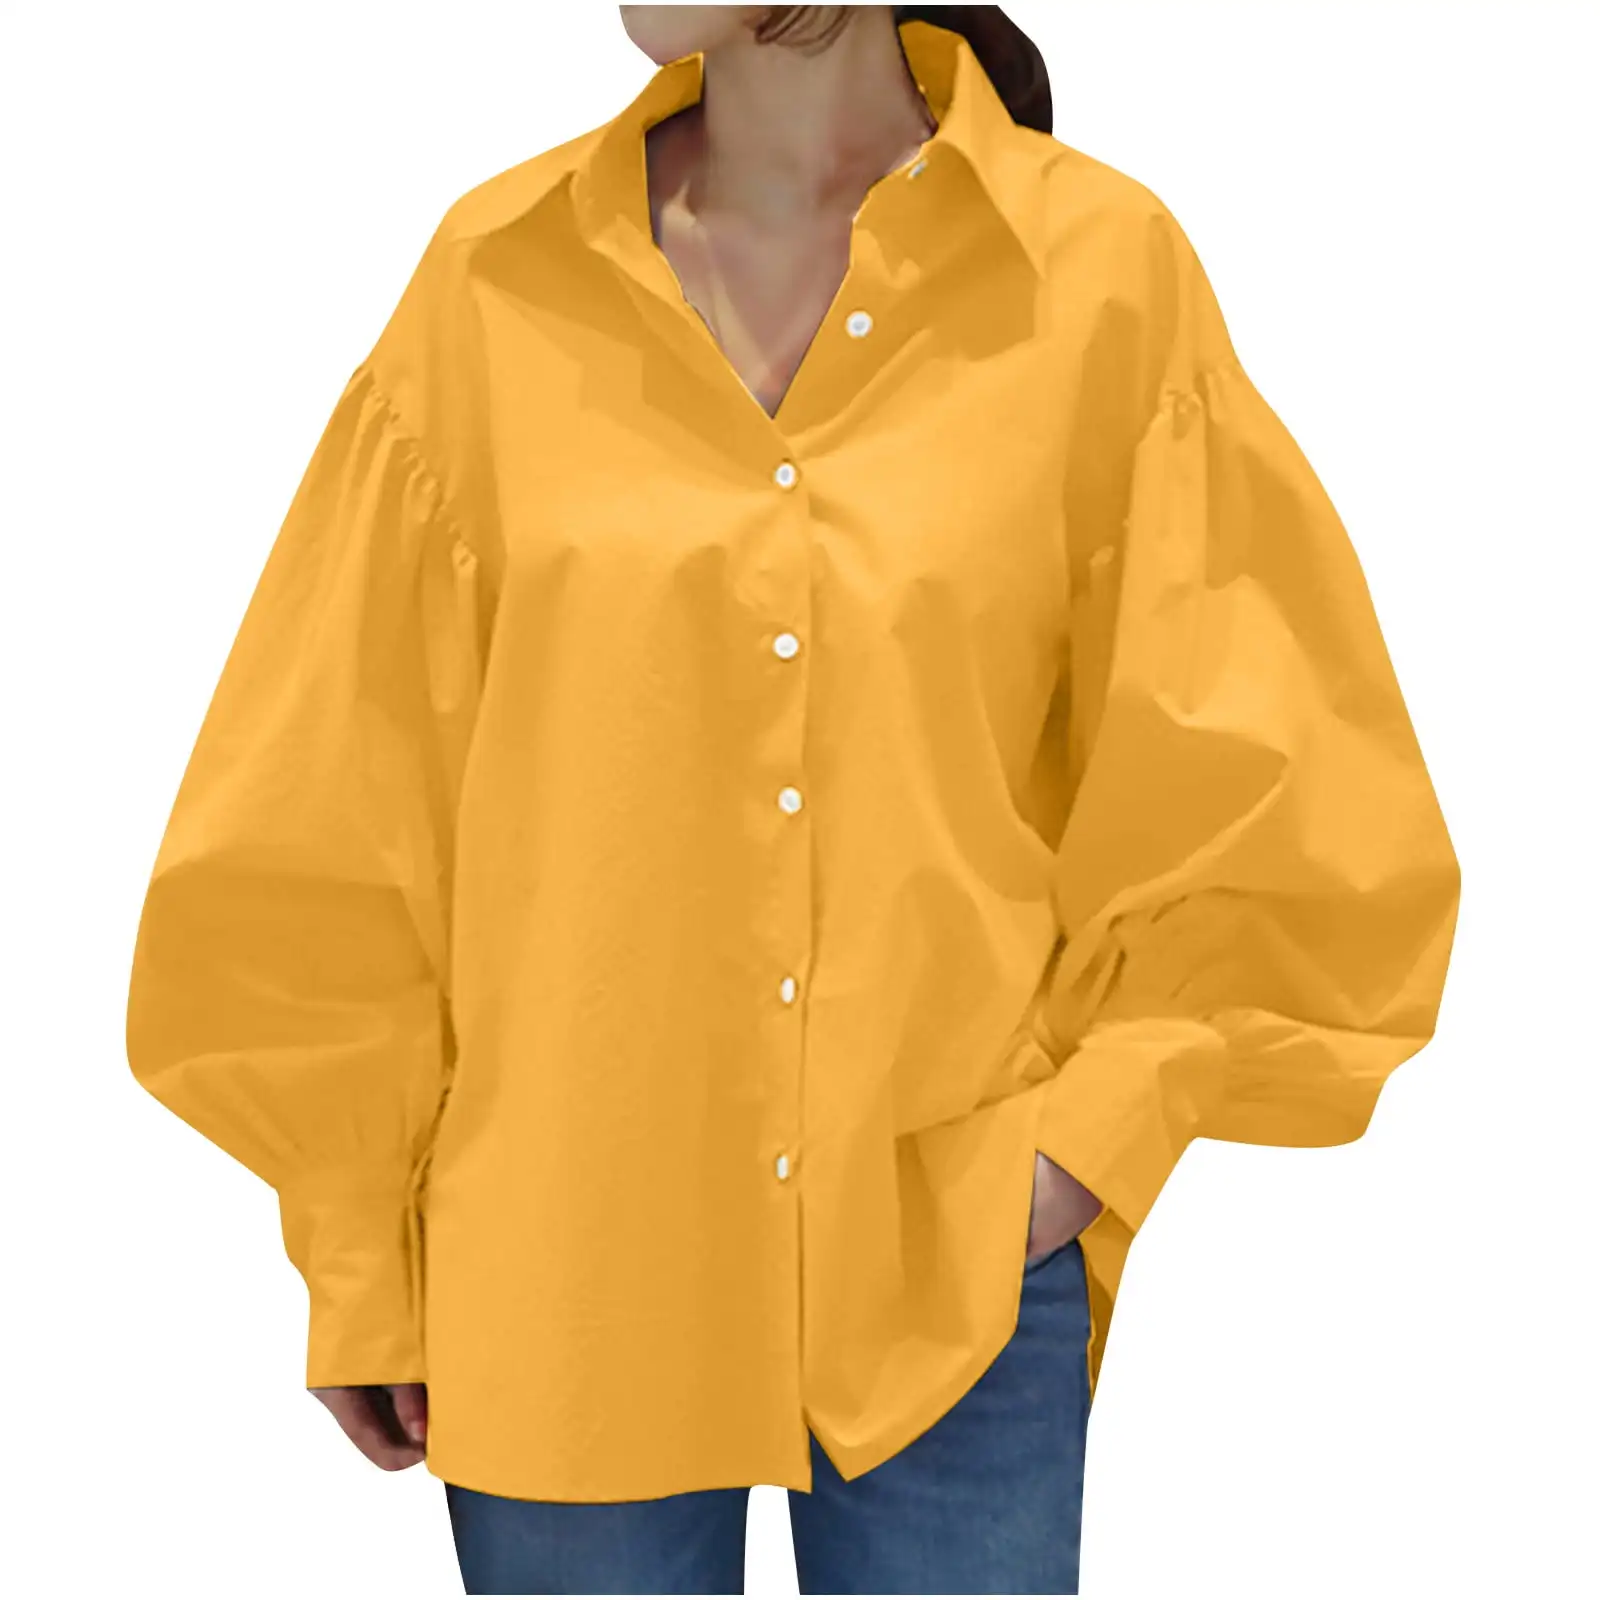 Oversized Button Down Shirts for Women Collared Lantern Long Sleeve Solid Color Baggy Casual Formal Work Blouse Tee [fila]women v collared shirt